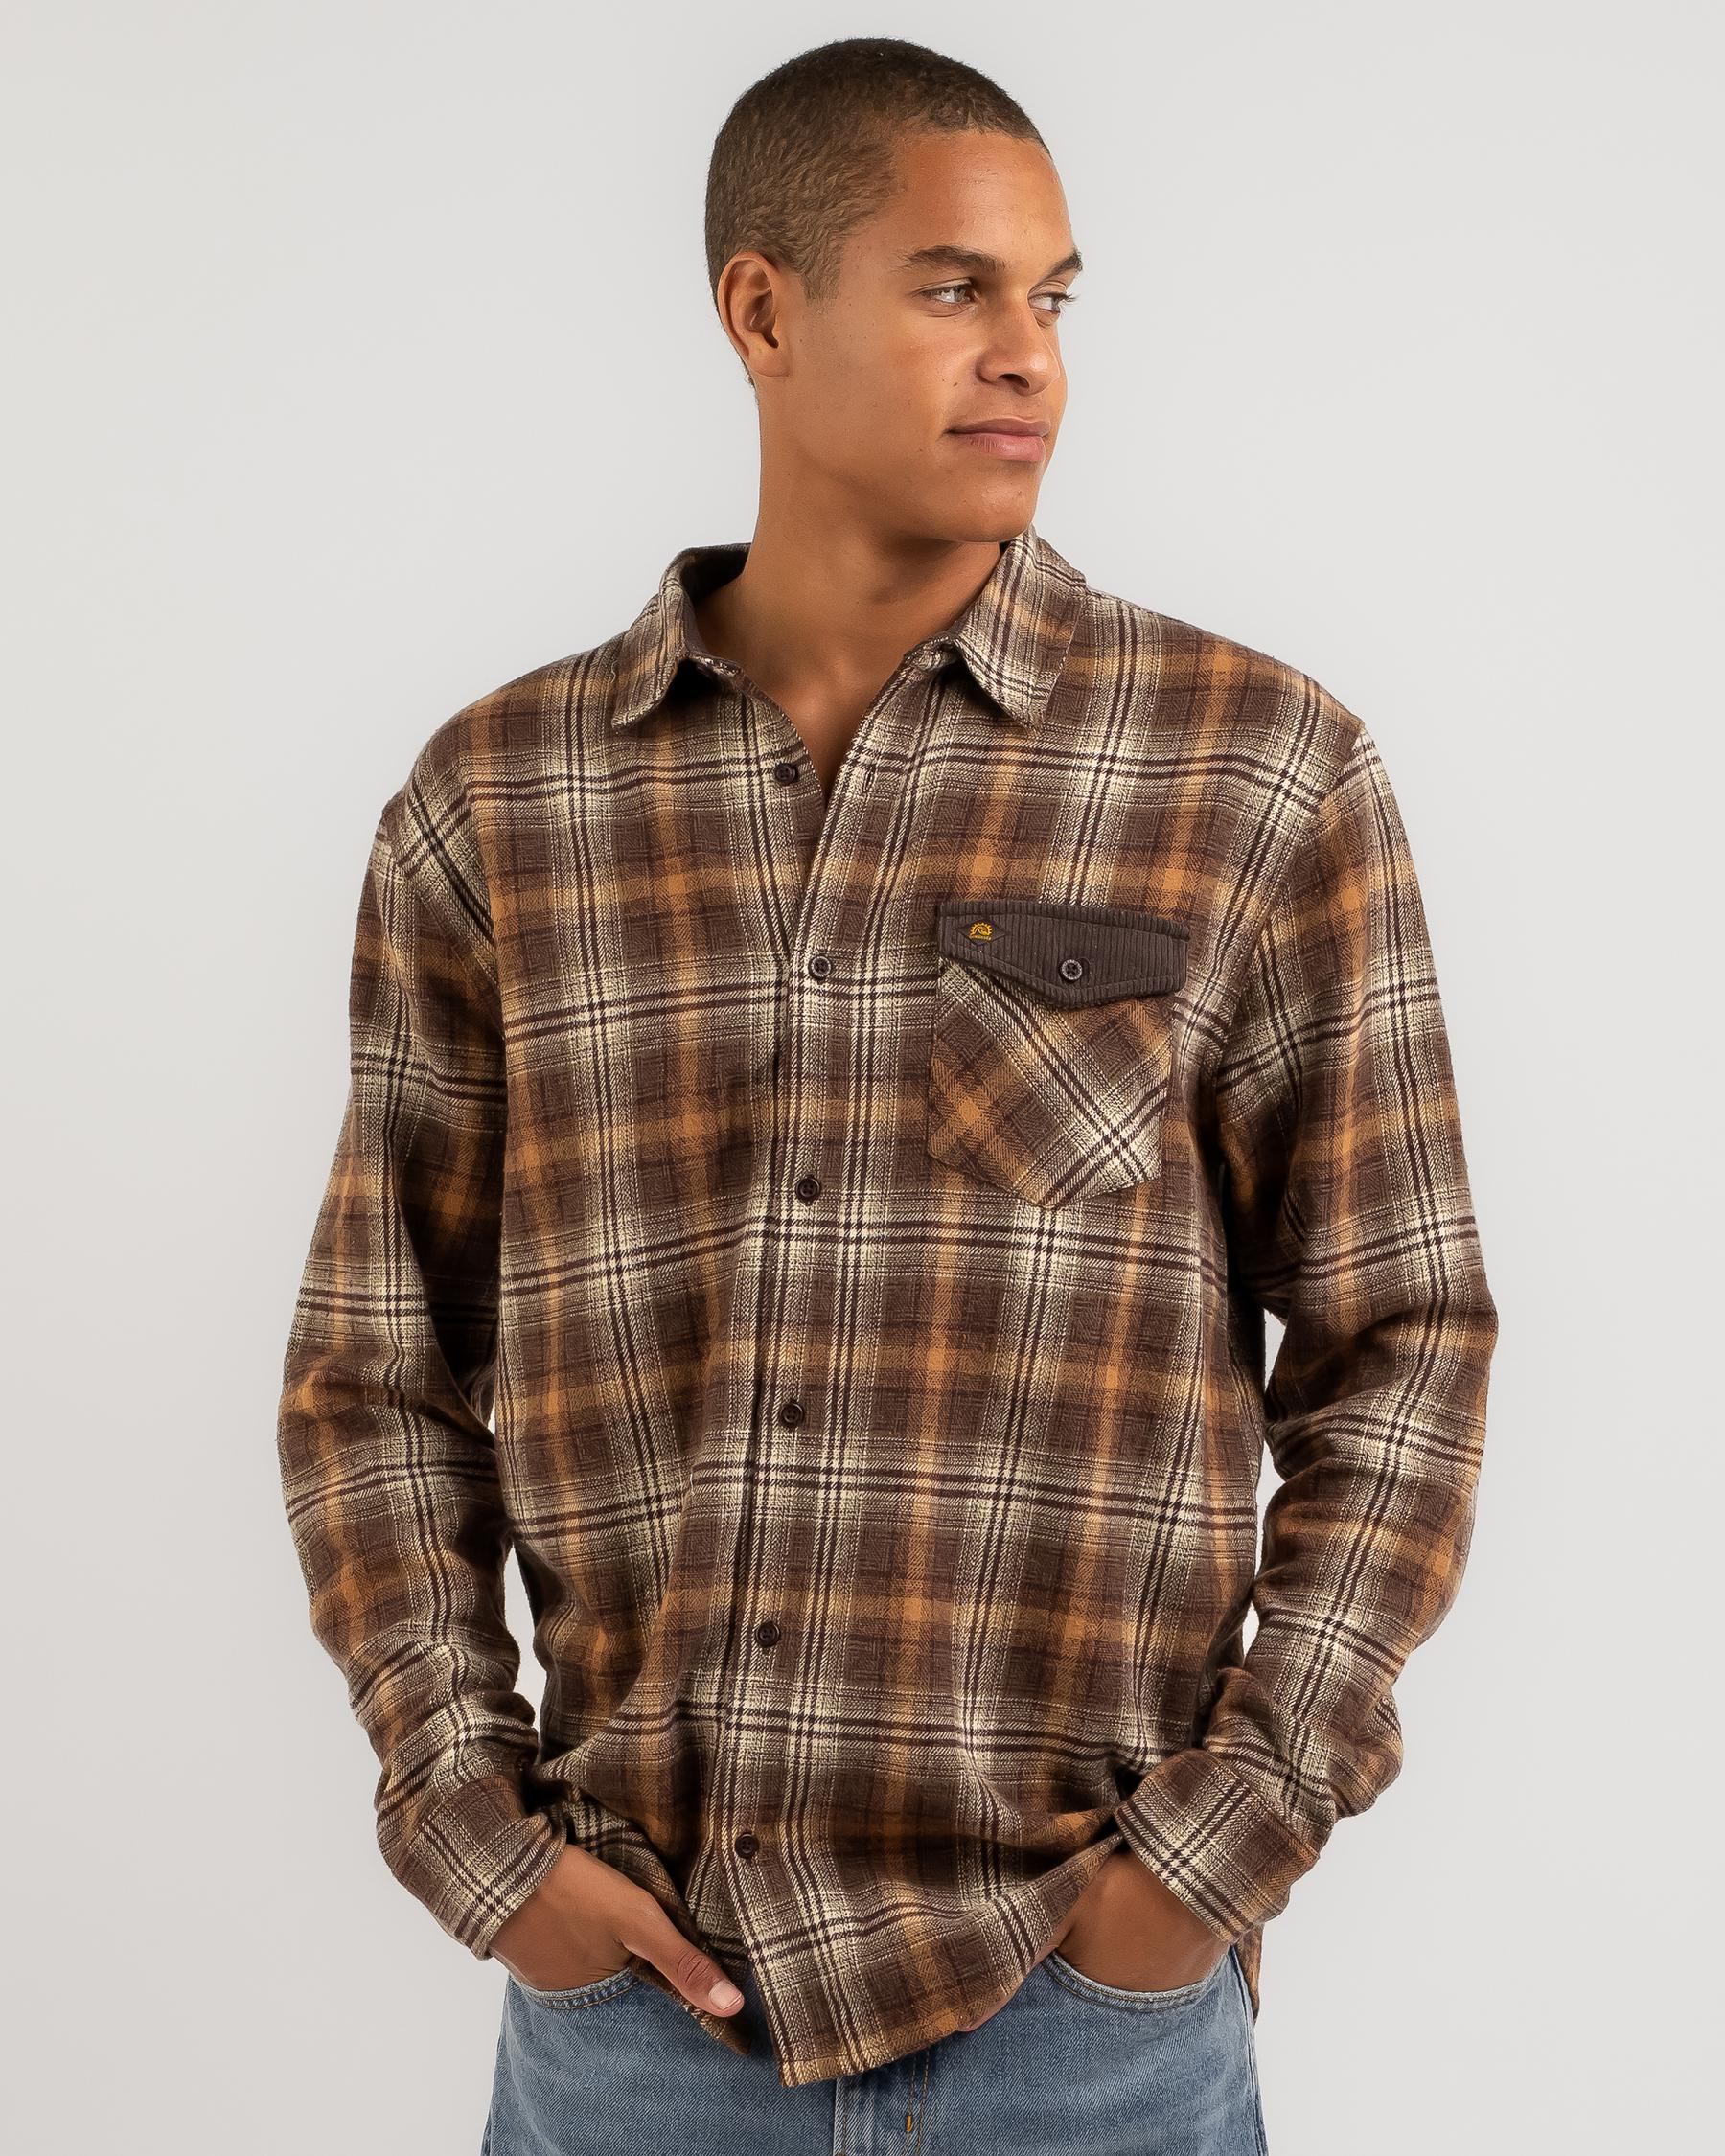 Quiksilver Calling Long Sleeve Flannel In Tobacco Brown Rural Check ...